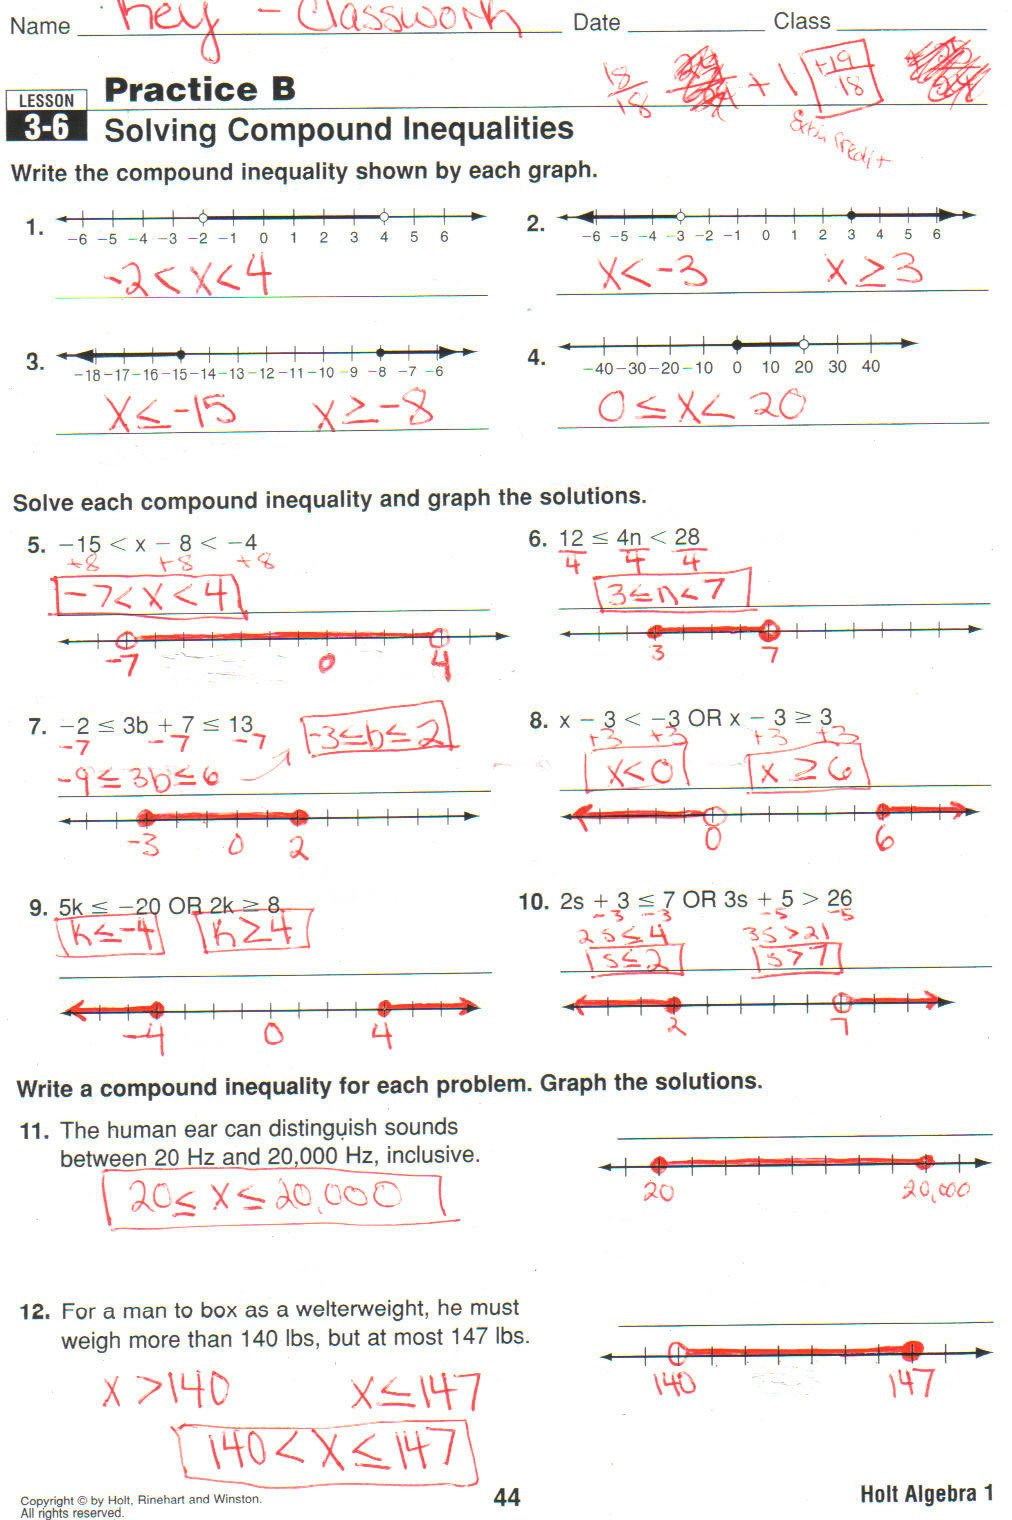 Compound Inequalities Worksheet Answers | excelguider.com